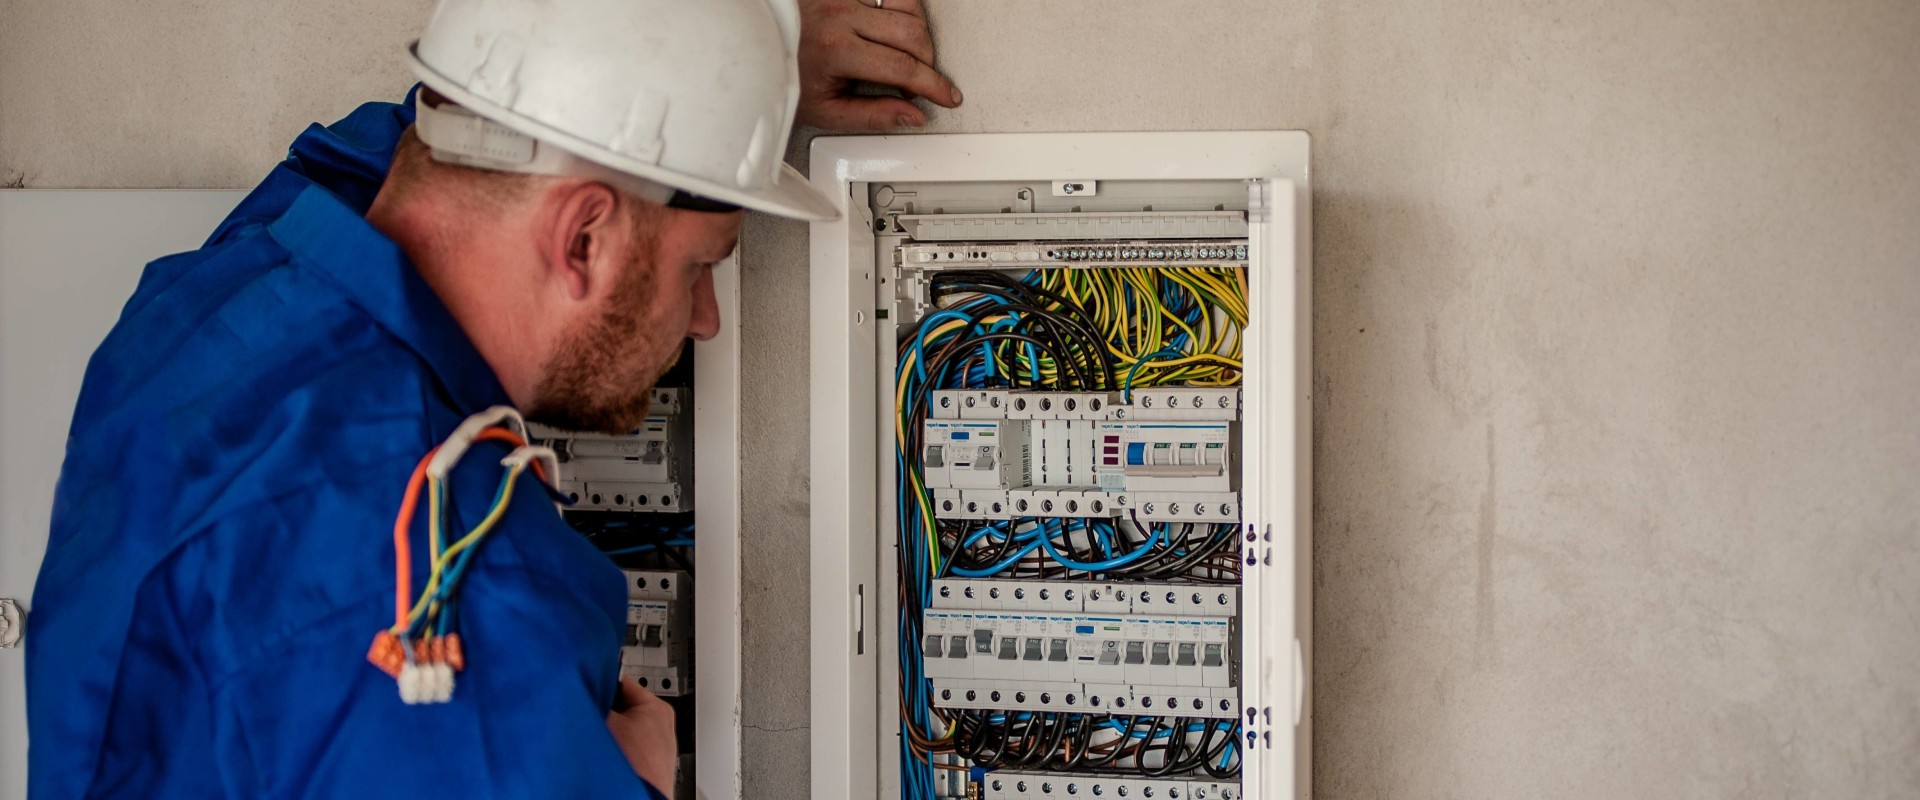 How Often Should You Do Electrical Maintenance? A Guide for Homeowners